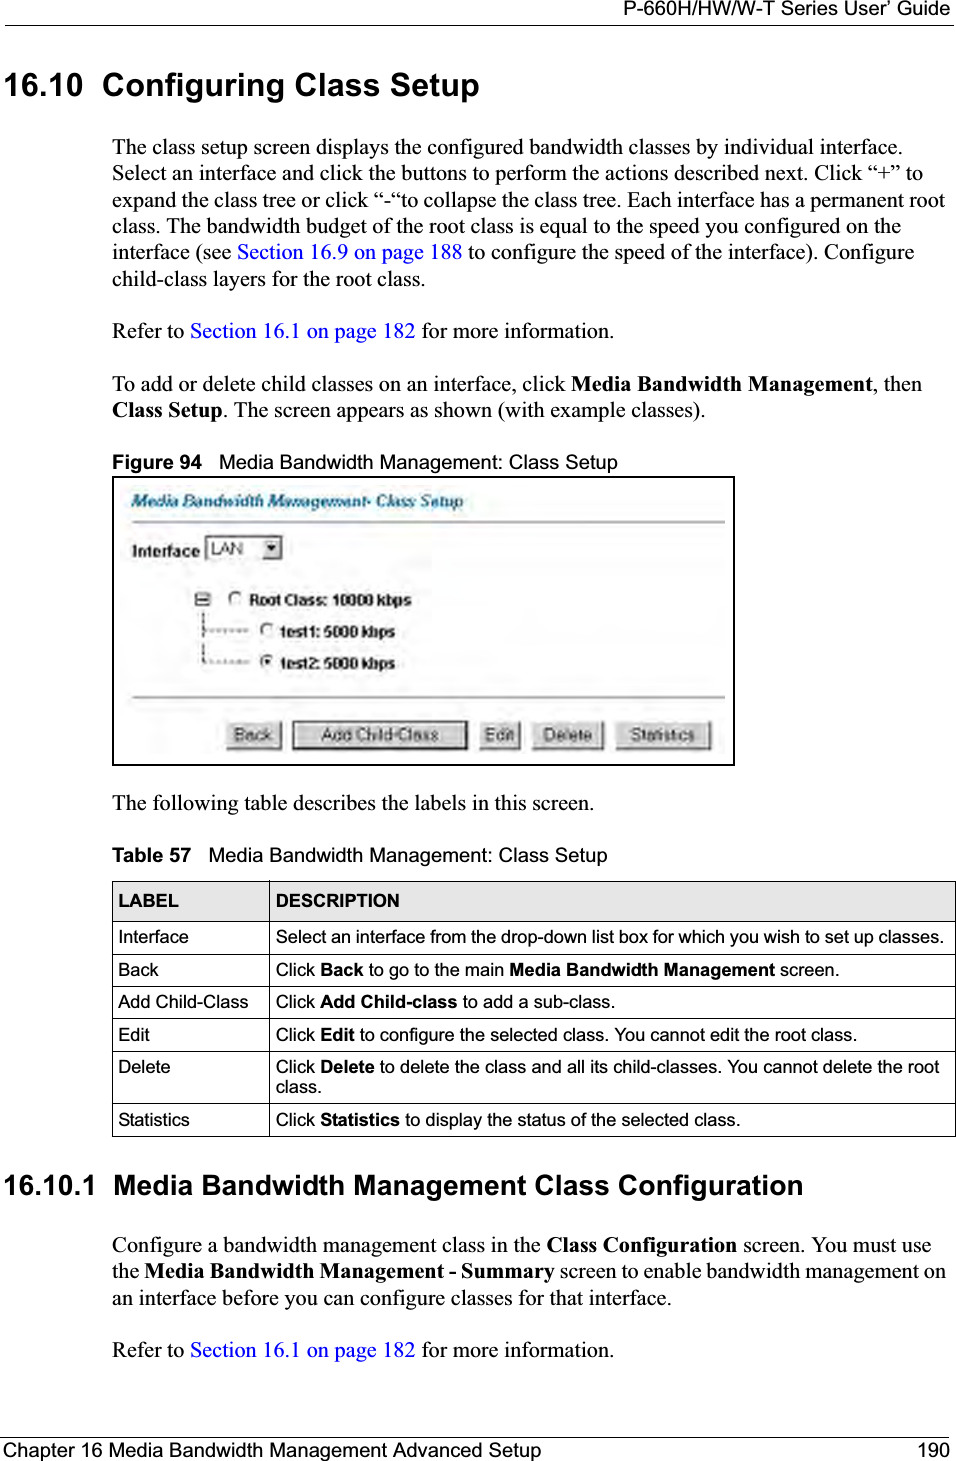 P-660H/HW/W-T Series User’ GuideChapter 16 Media Bandwidth Management Advanced Setup 19016.10  Configuring Class SetupThe class setup screen displays the configured bandwidth classes by individual interface. Select an interface and click the buttons to perform the actions described next. Click “+” to expand the class tree or click “-“to collapse the class tree. Each interface has a permanent root class. The bandwidth budget of the root class is equal to the speed you configured on the interface (see Section 16.9 on page 188 to configure the speed of the interface). Configure child-class layers for the root class. Refer to Section 16.1 on page 182 for more information. To add or delete child classes on an interface, click Media Bandwidth Management, then Class Setup. The screen appears as shown (with example classes).Figure 94   Media Bandwidth Management: Class SetupThe following table describes the labels in this screen.   16.10.1  Media Bandwidth Management Class Configuration   Configure a bandwidth management class in the Class Configuration screen. You must use the Media Bandwidth Management - Summary screen to enable bandwidth management on an interface before you can configure classes for that interface.Refer to Section 16.1 on page 182 for more information. Table 57   Media Bandwidth Management: Class SetupLABEL DESCRIPTIONInterface Select an interface from the drop-down list box for which you wish to set up classes. Back Click Back to go to the main Media Bandwidth Management screen.Add Child-Class Click Add Child-class to add a sub-class. Edit Click Edit to configure the selected class. You cannot edit the root class.Delete Click Delete to delete the class and all its child-classes. You cannot delete the root class.Statistics Click Statistics to display the status of the selected class.